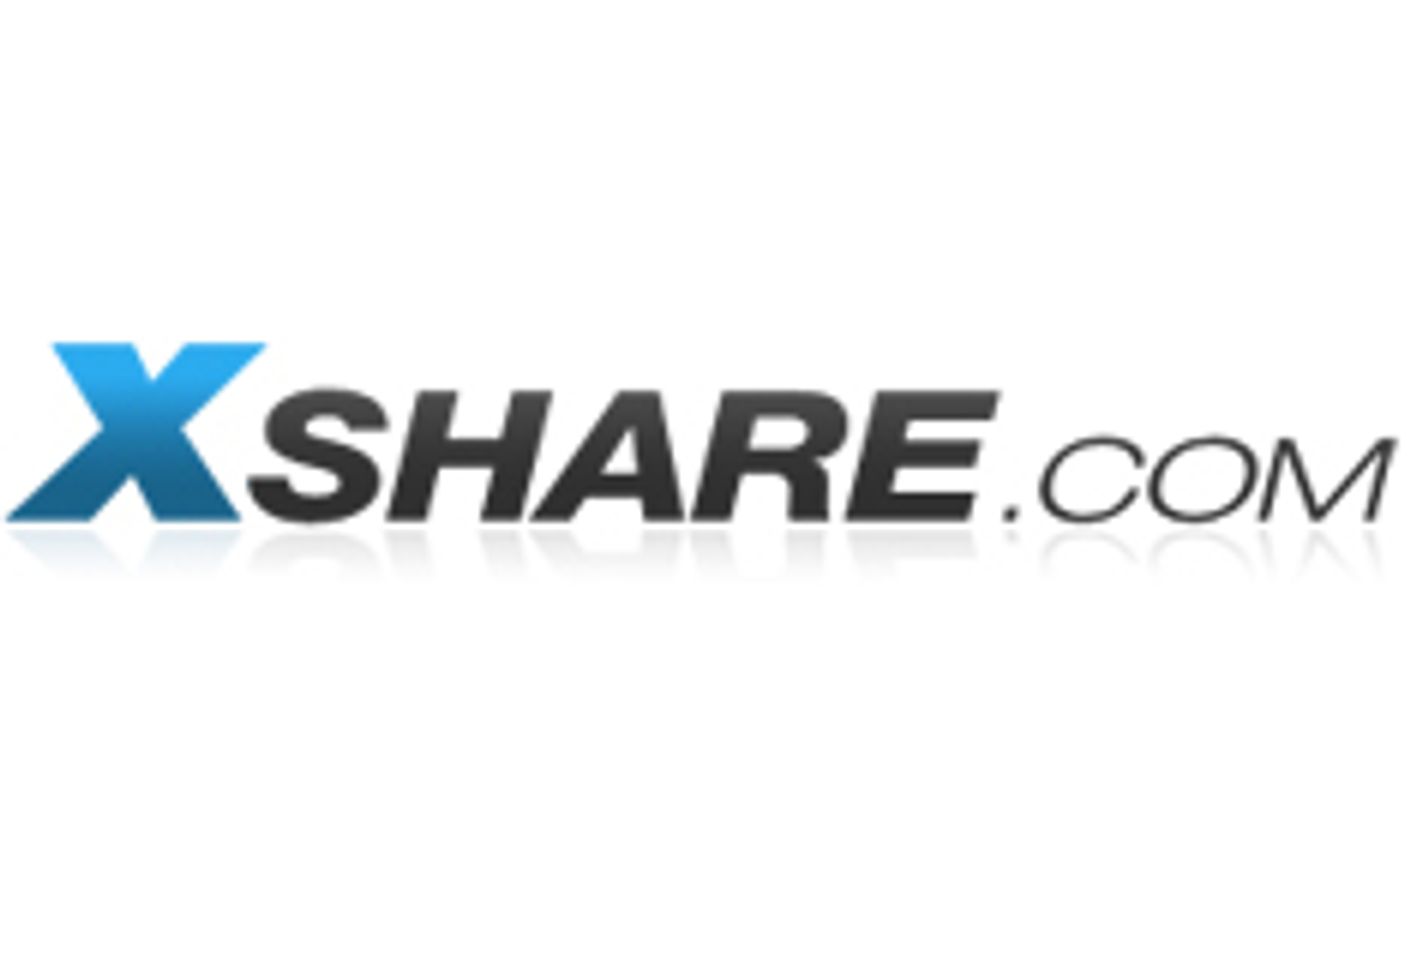 Mobile.xshare.com Thanks Apple for Its Ban on Adult Content